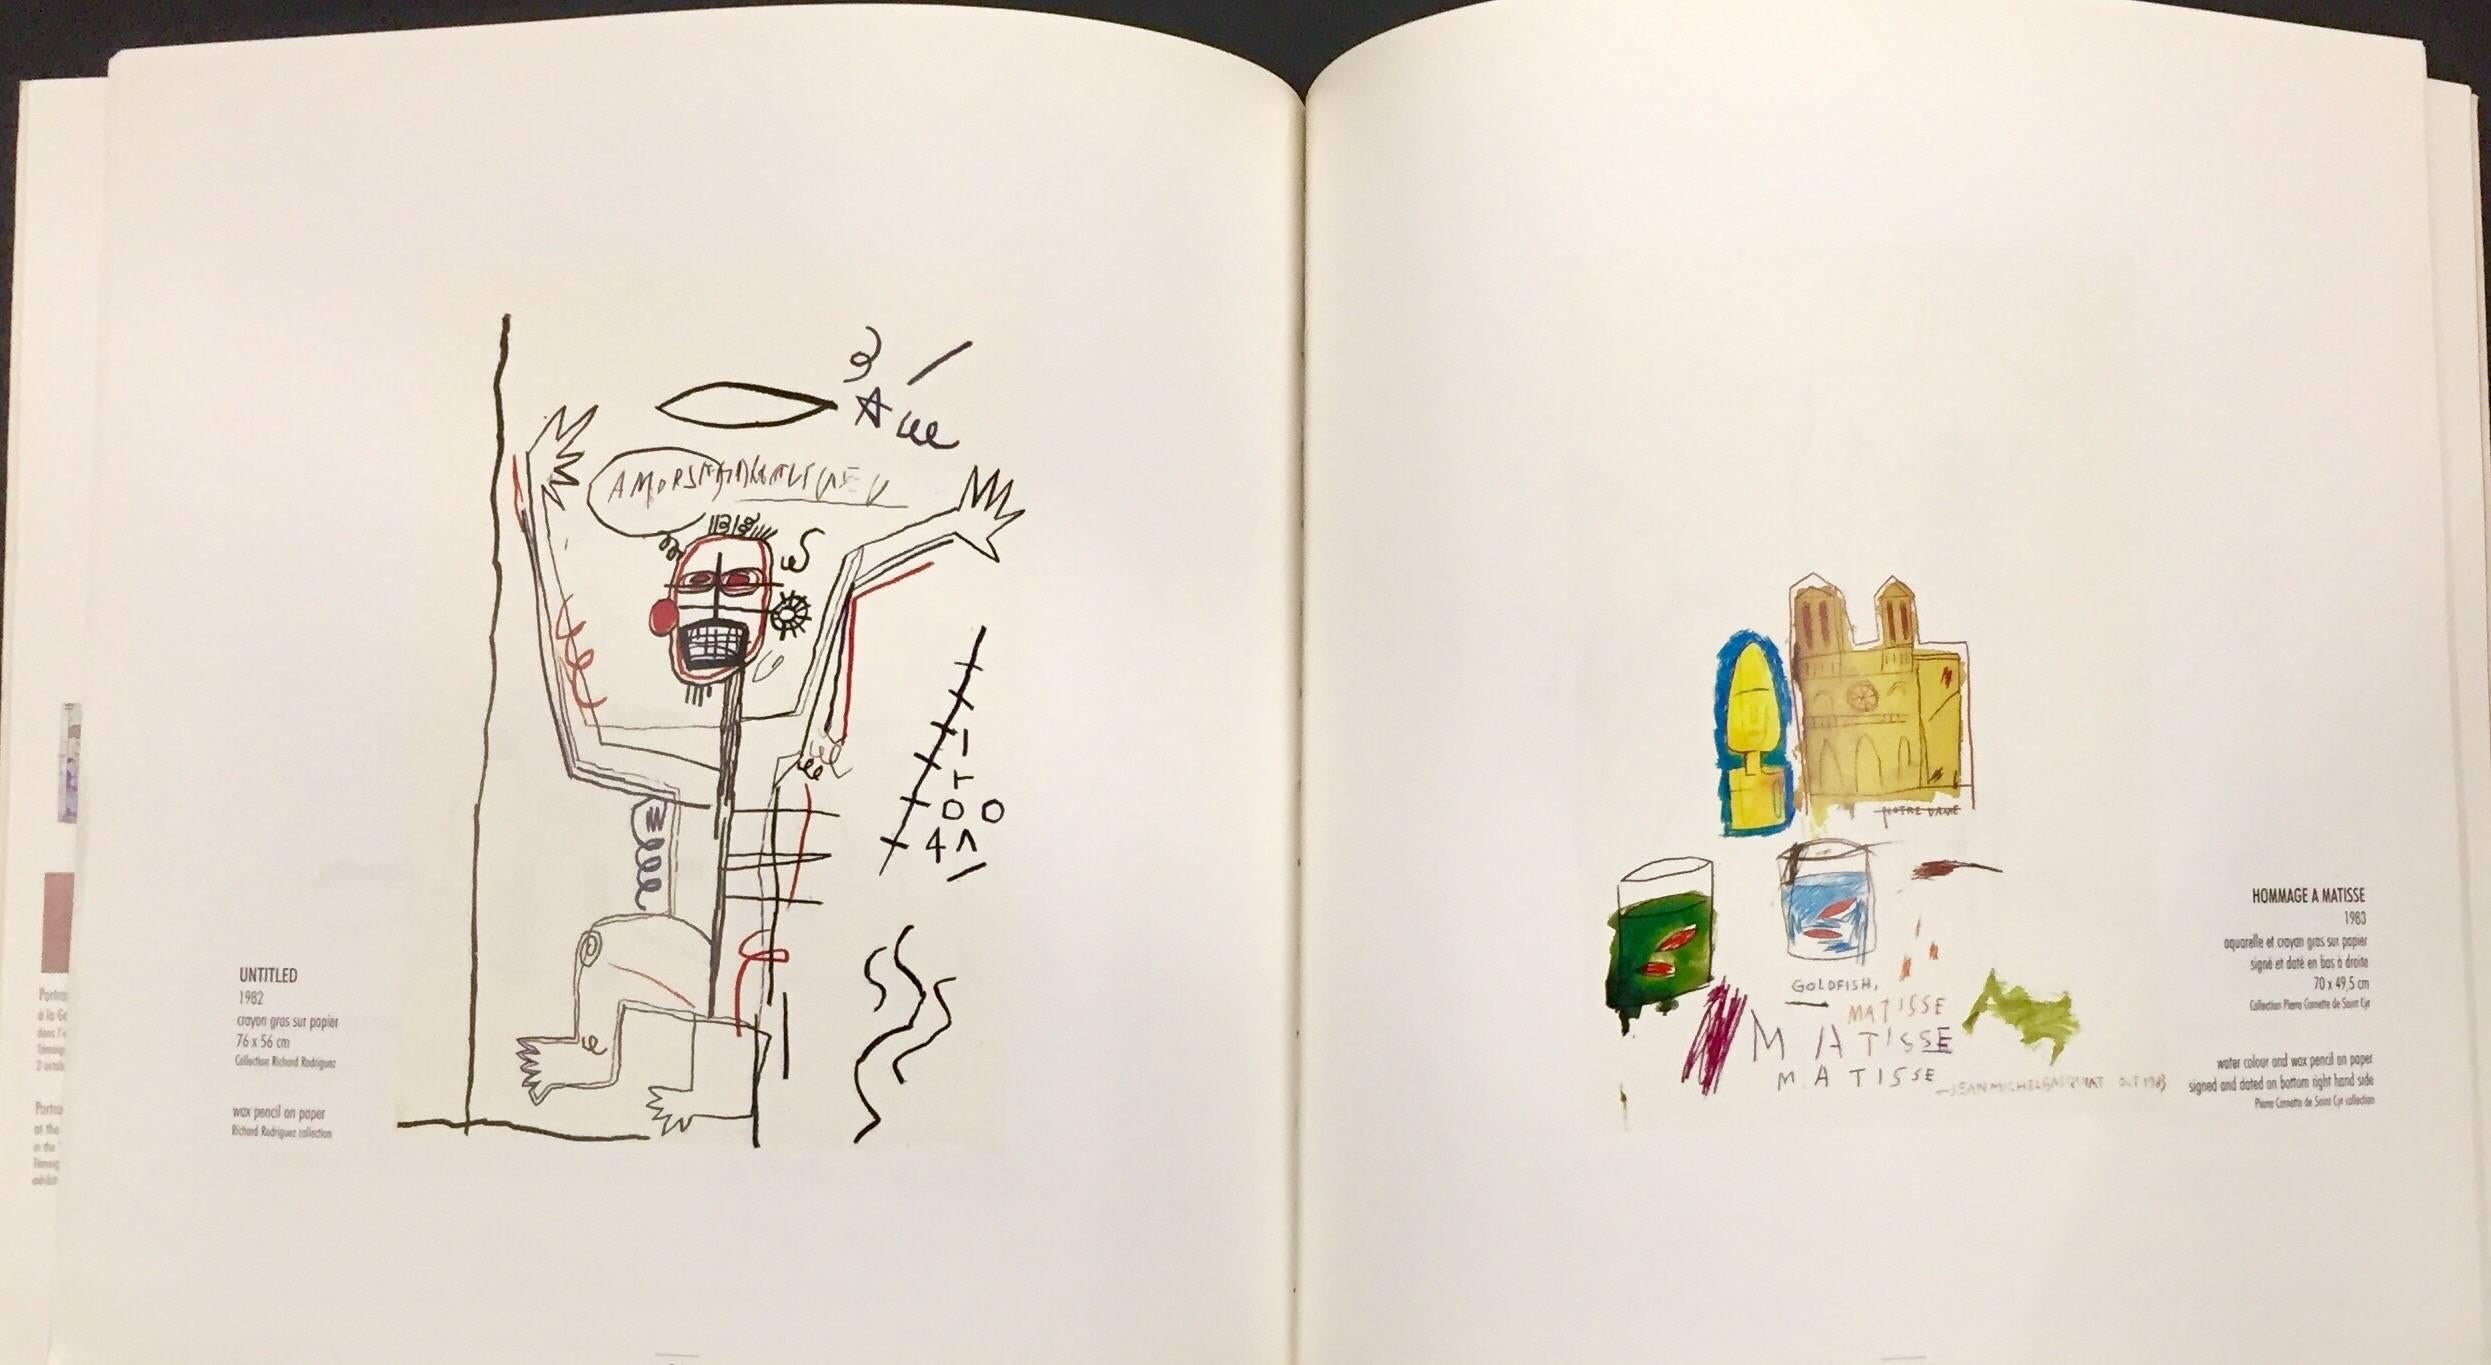 Rare vintage Basquiat exhibit catalogue for:
Basquiat The Transcendental Voyage, at L'Espal; Le Mans, France, 1999

Back and front cover photos by Tseng Kwong Chi
Minor shelf wear; otherwise good to very good condition
Approximately 50 pgs